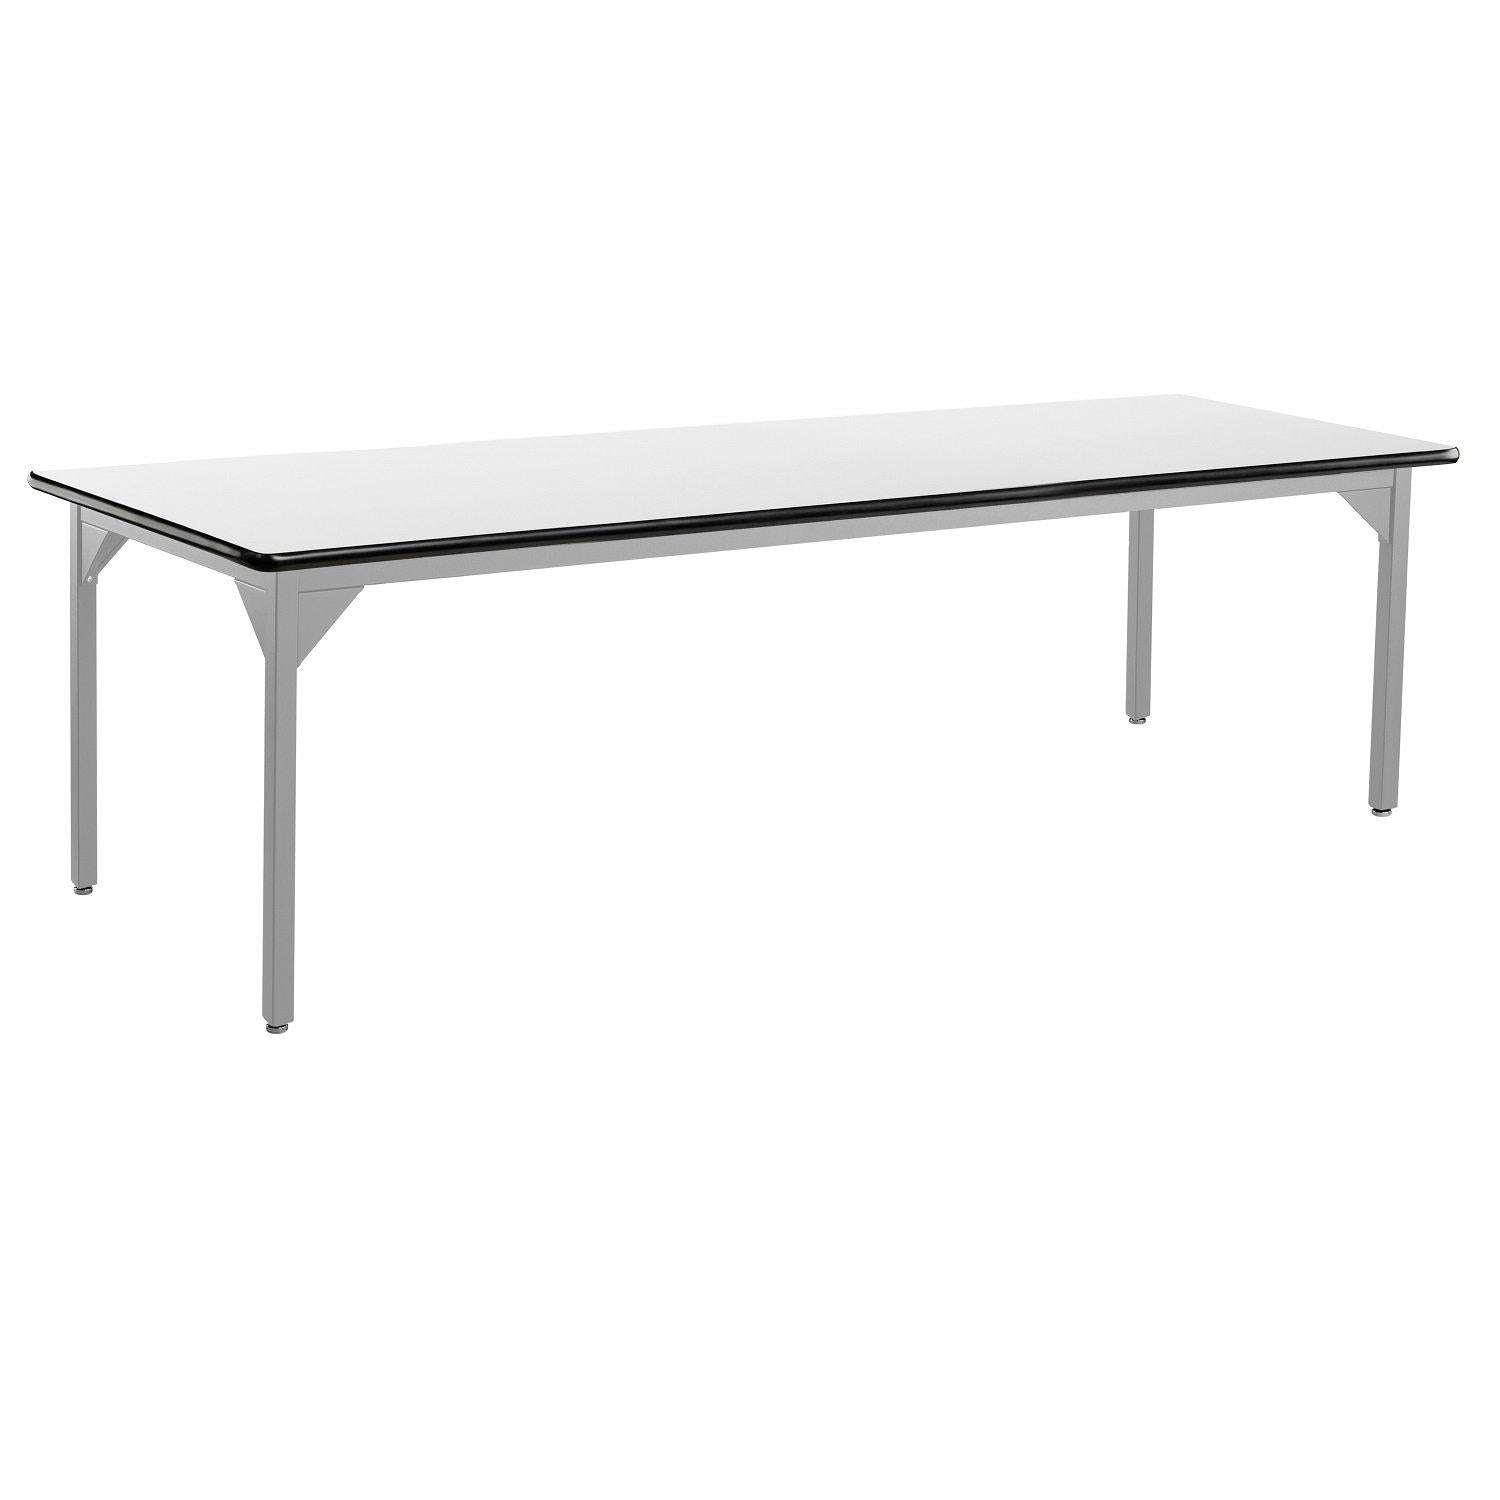 Heavy-Duty Fixed Height Utility Table, Soft Grey Frame, 36" x 72", Whiteboard High-Pressure Laminate Top